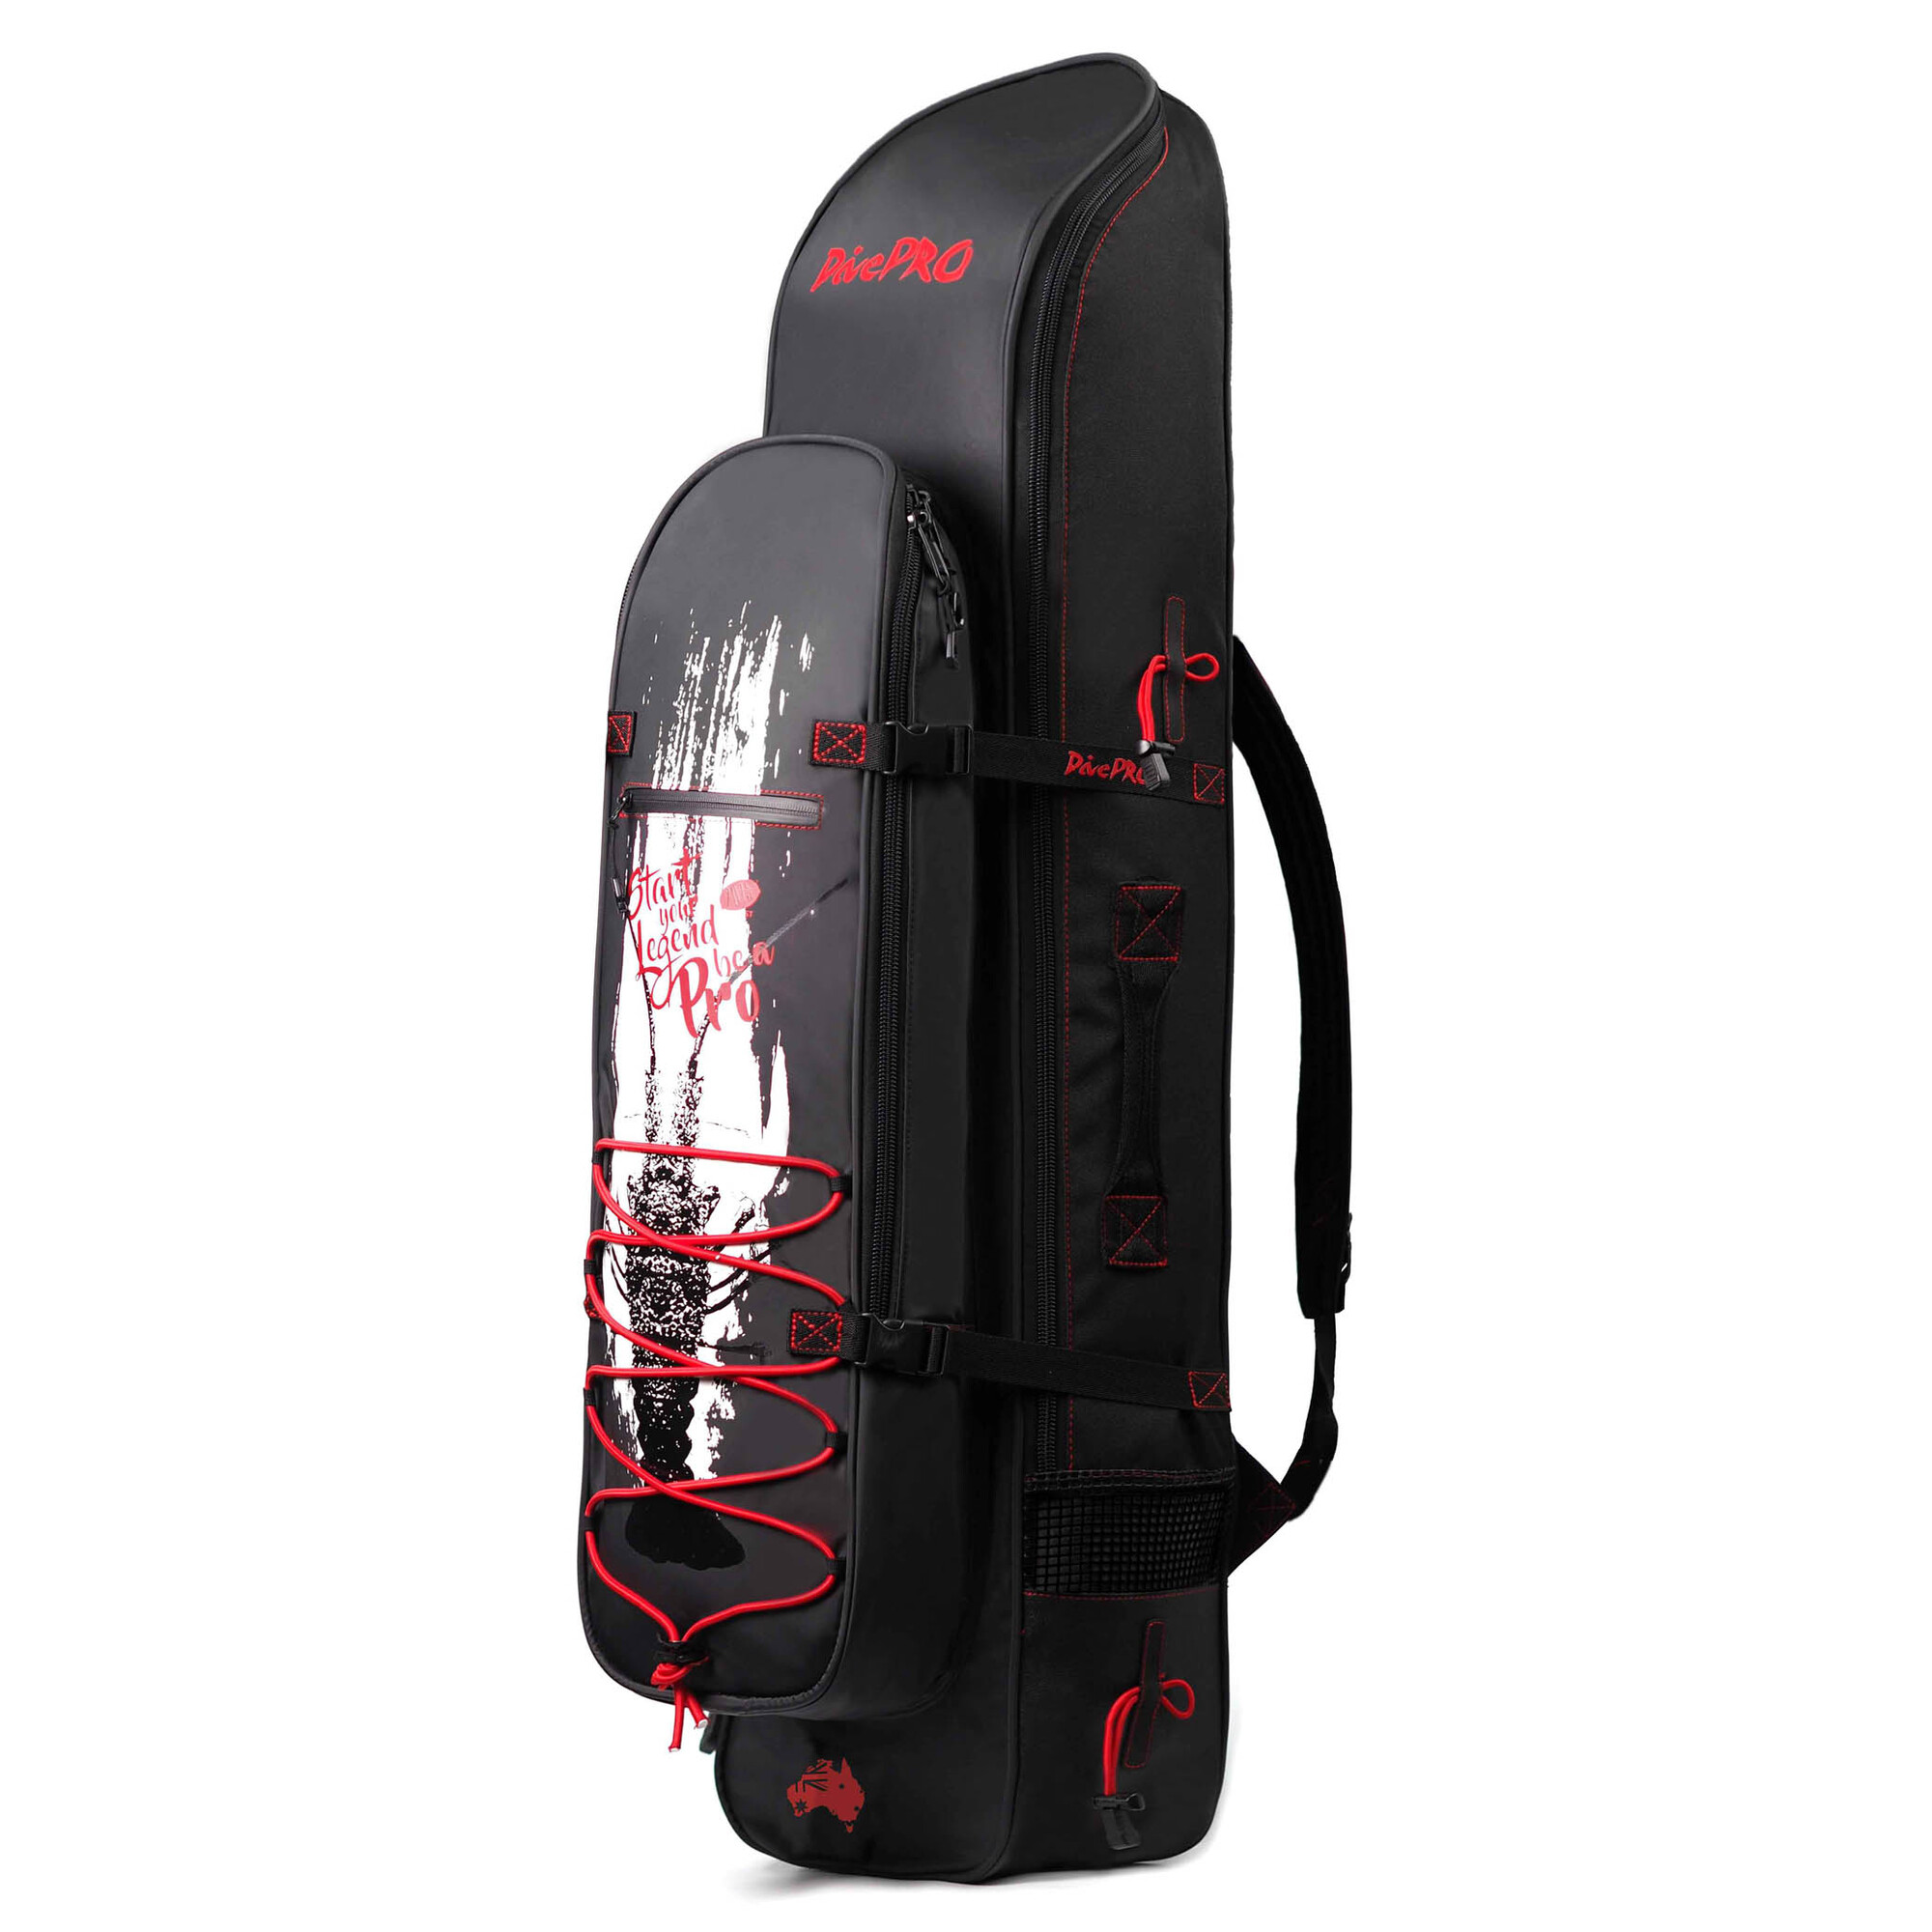 DivePRO Cray Hunter Spearfishing Gear Bag Freediving Backpack Bag